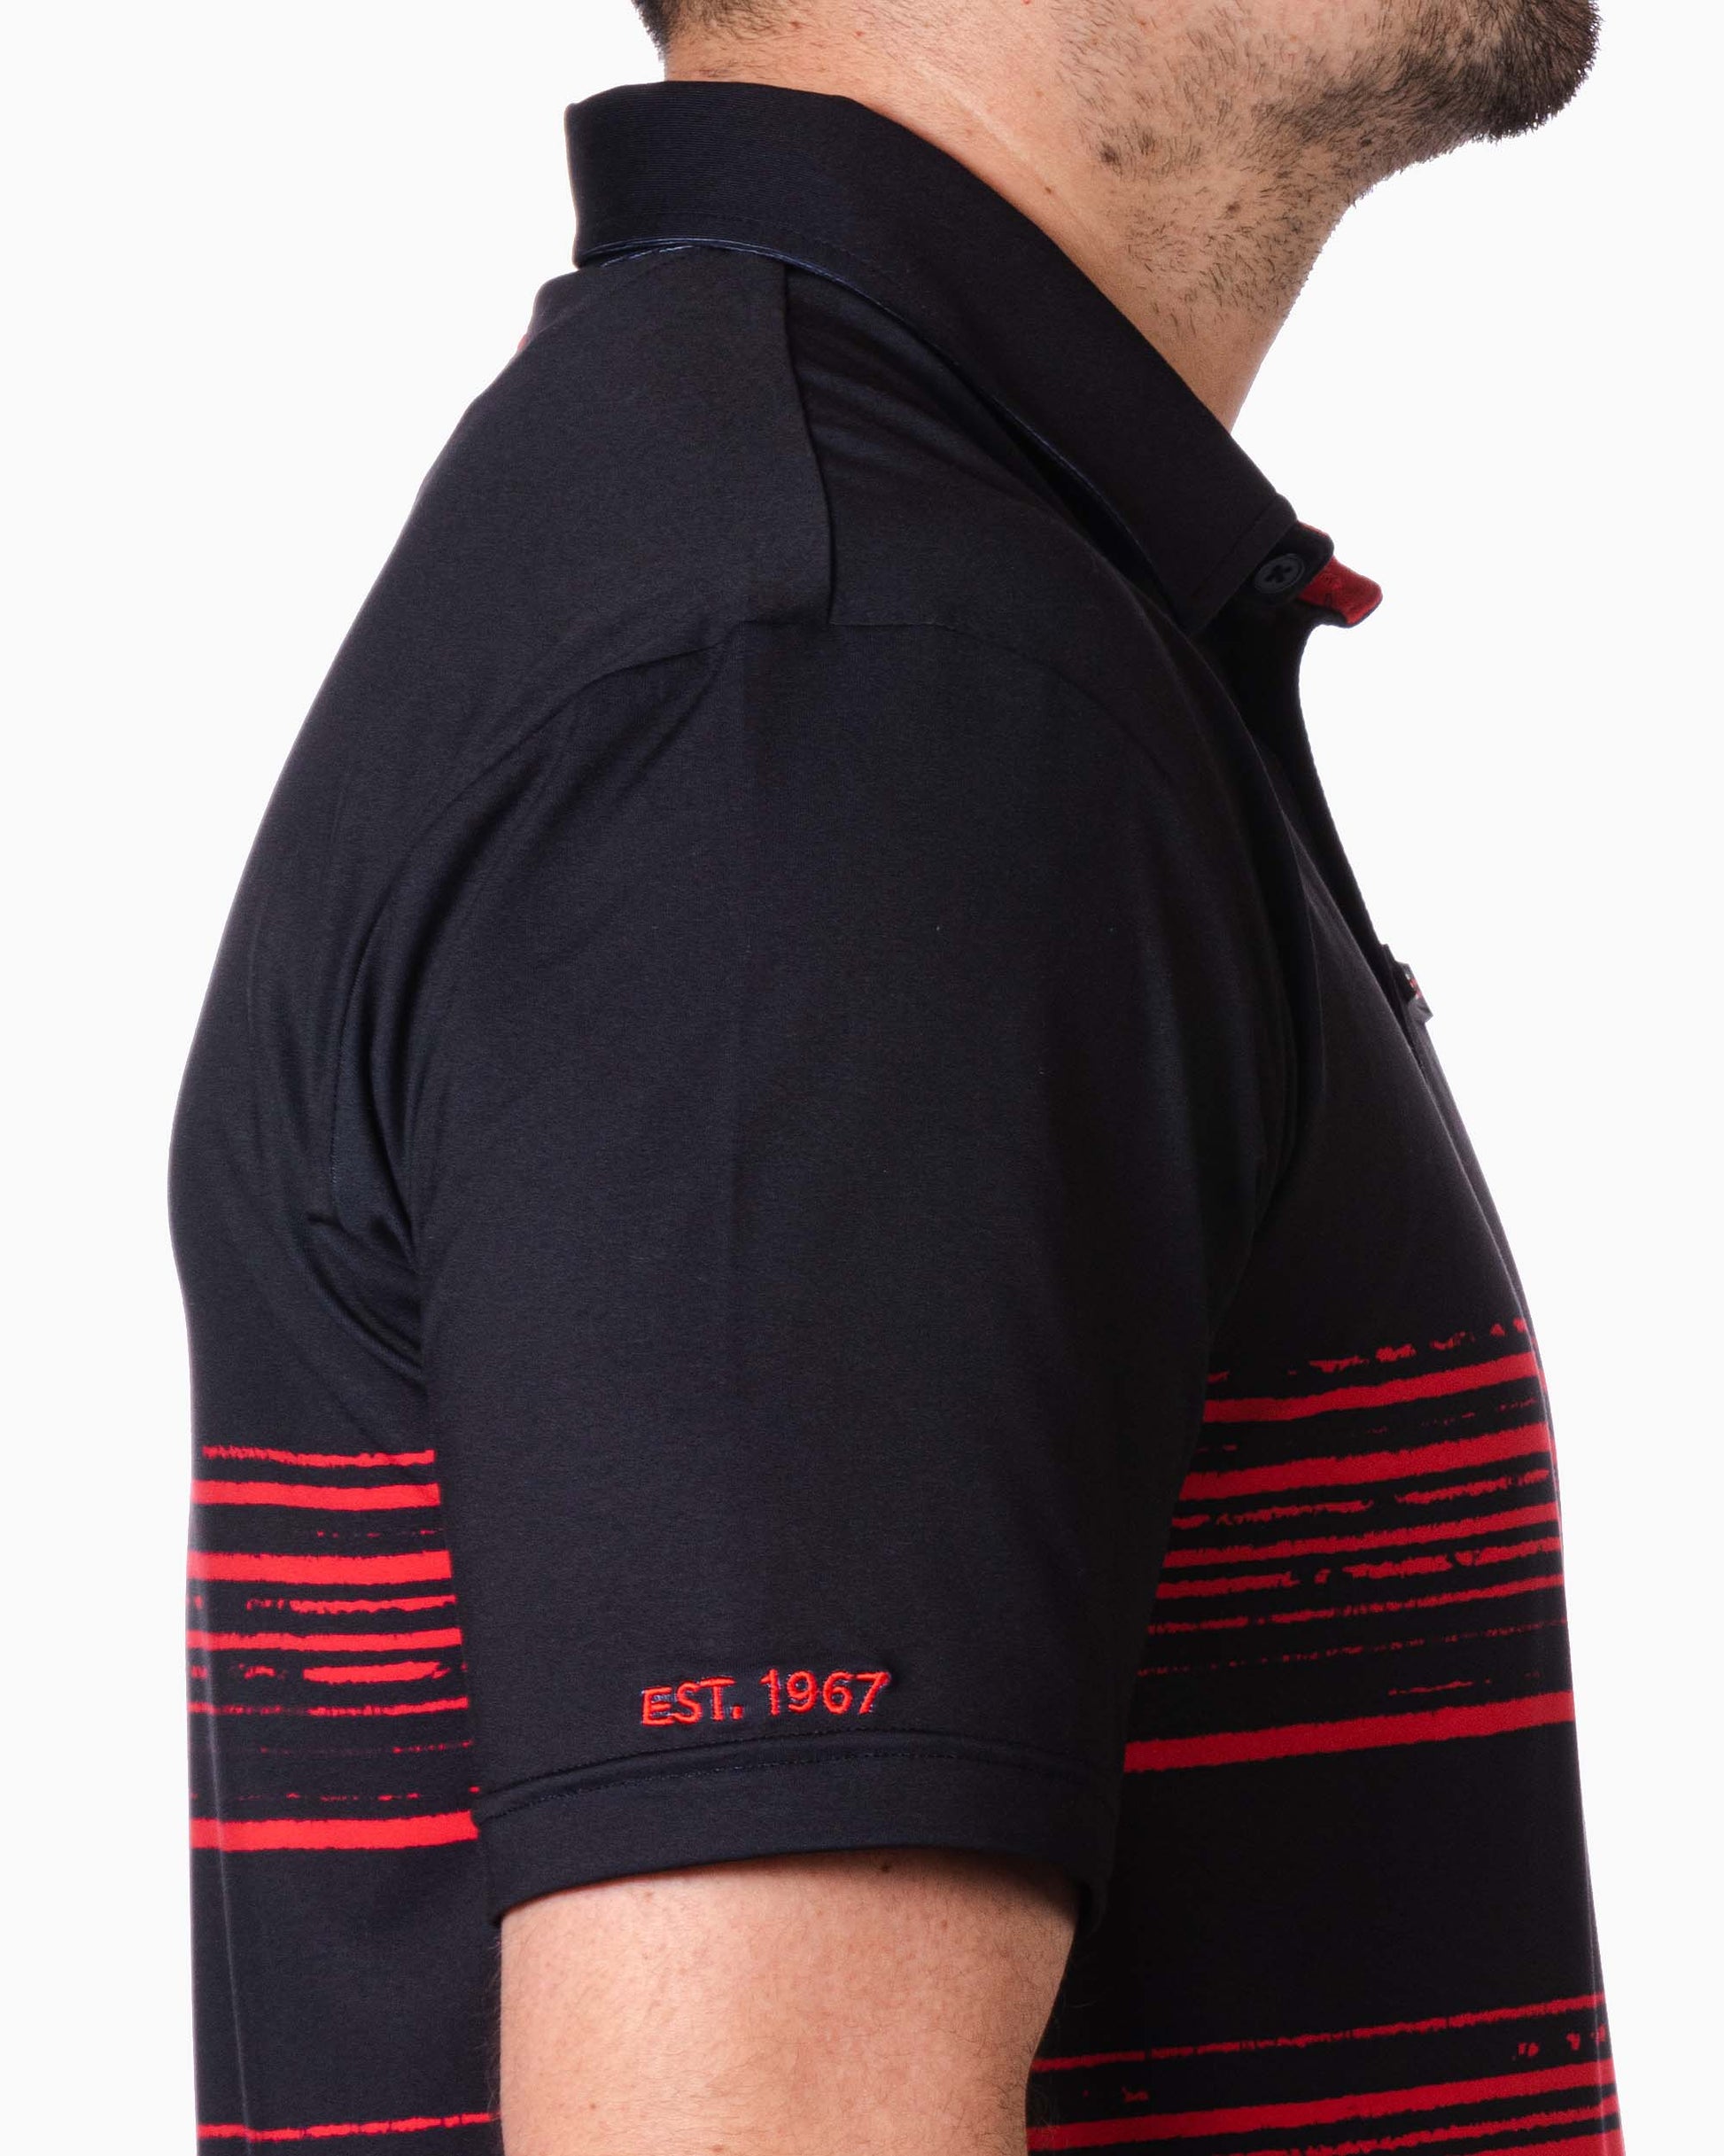 close up of sleeve with red embroidered "est. 1967"